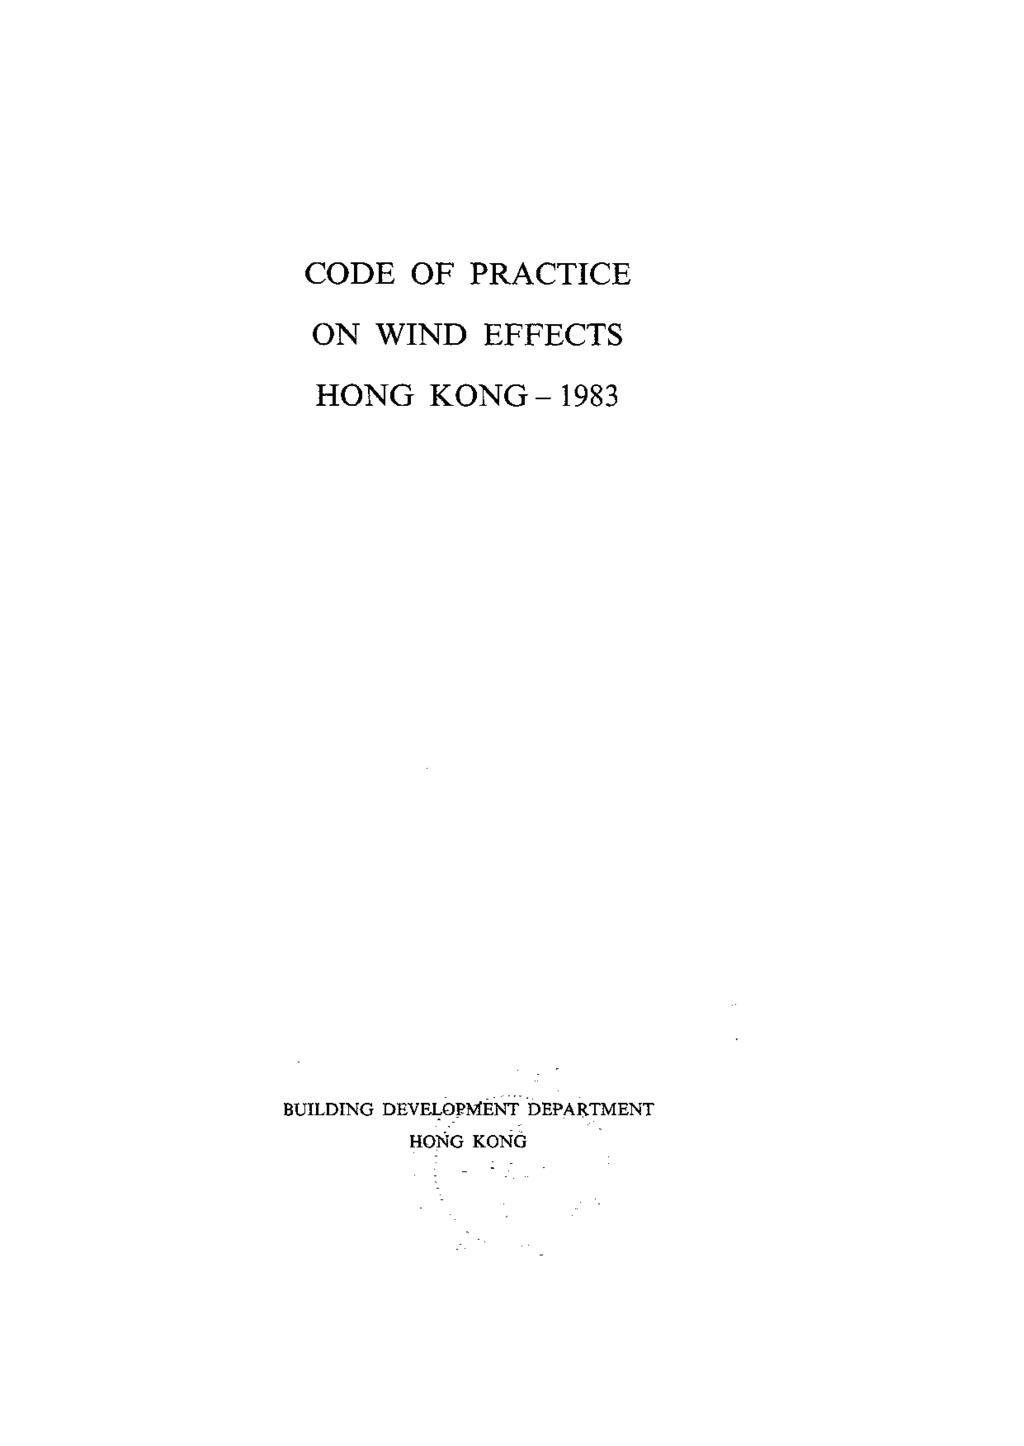 CODE OF PRACTICE ON WIND EFFECTS HONG